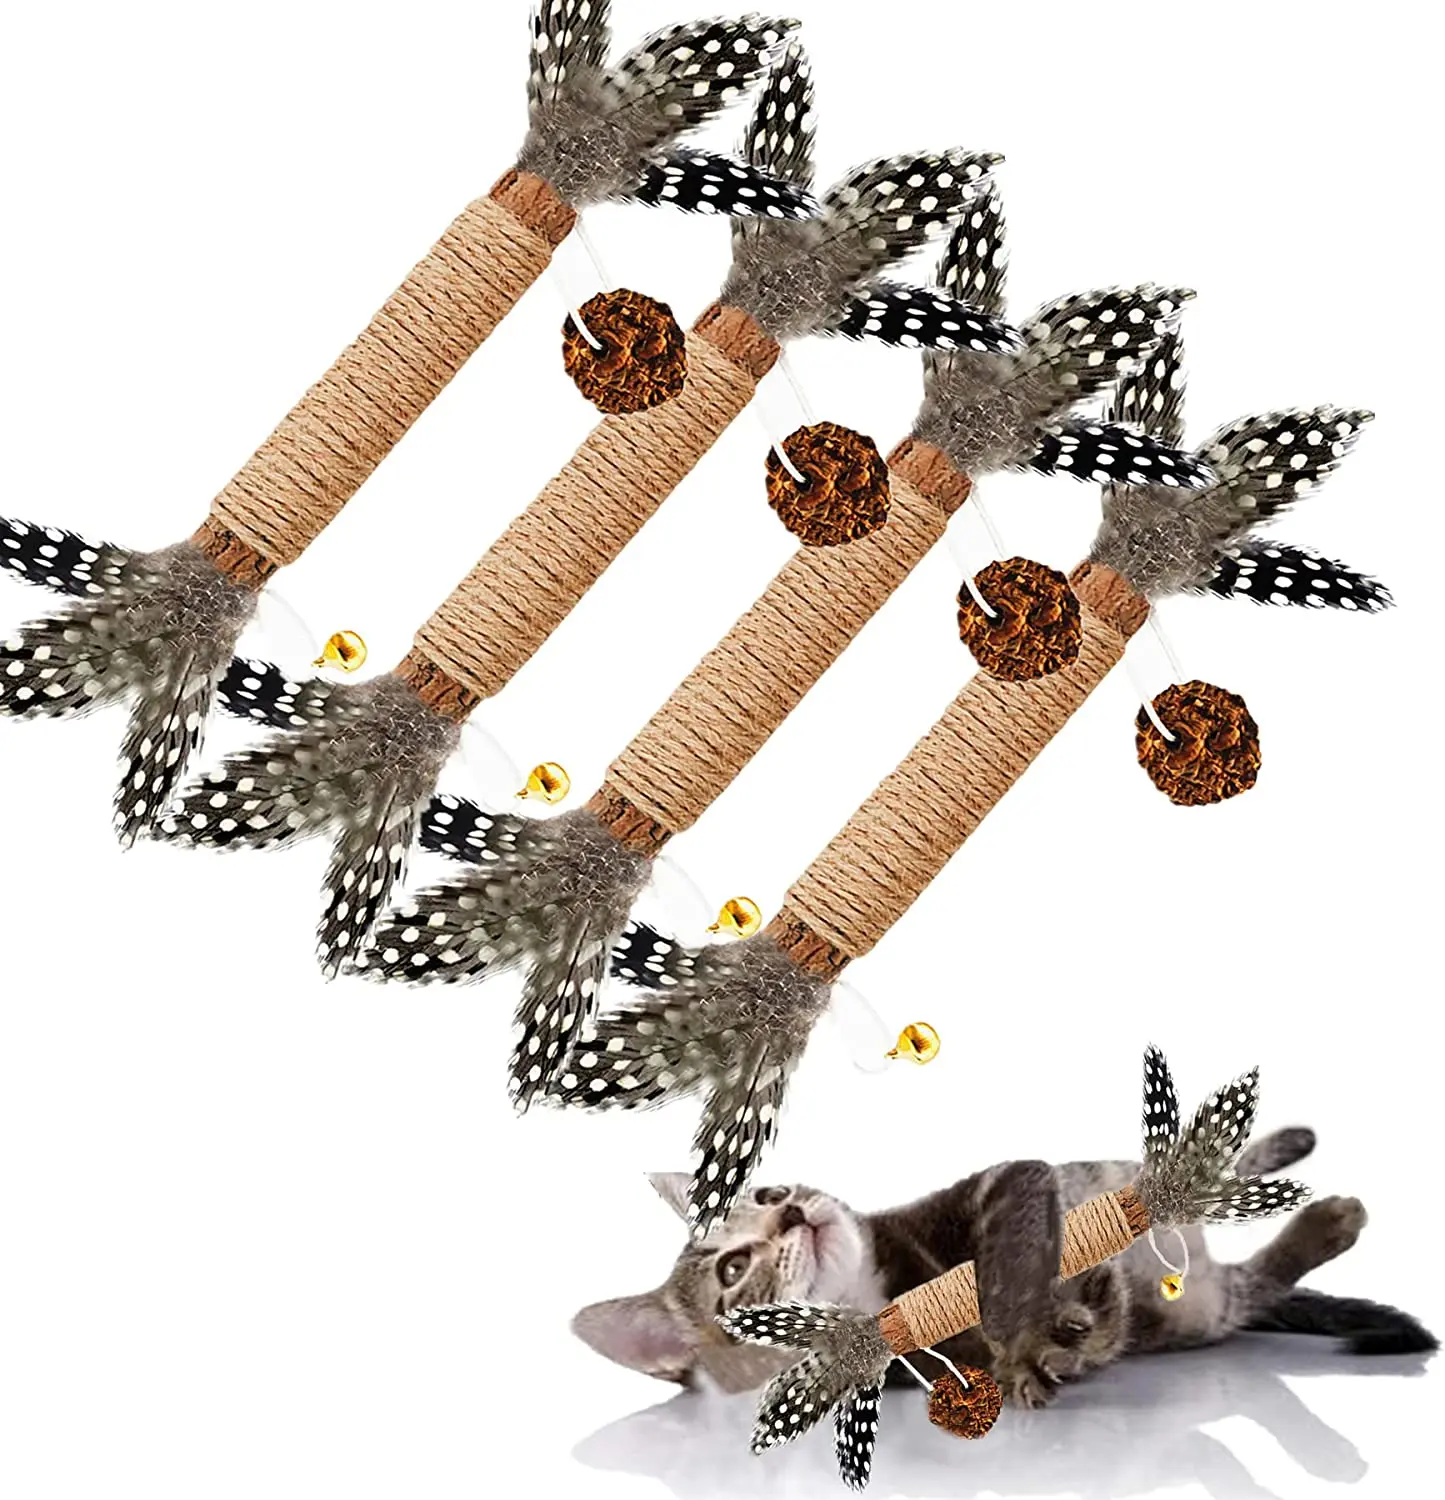 

Cat Toys Feather Toy Kitten Chew Stick Treat with Bell for Cleaning Teeth Indoor Kitty Teaser Wand Bunny Molar Snack